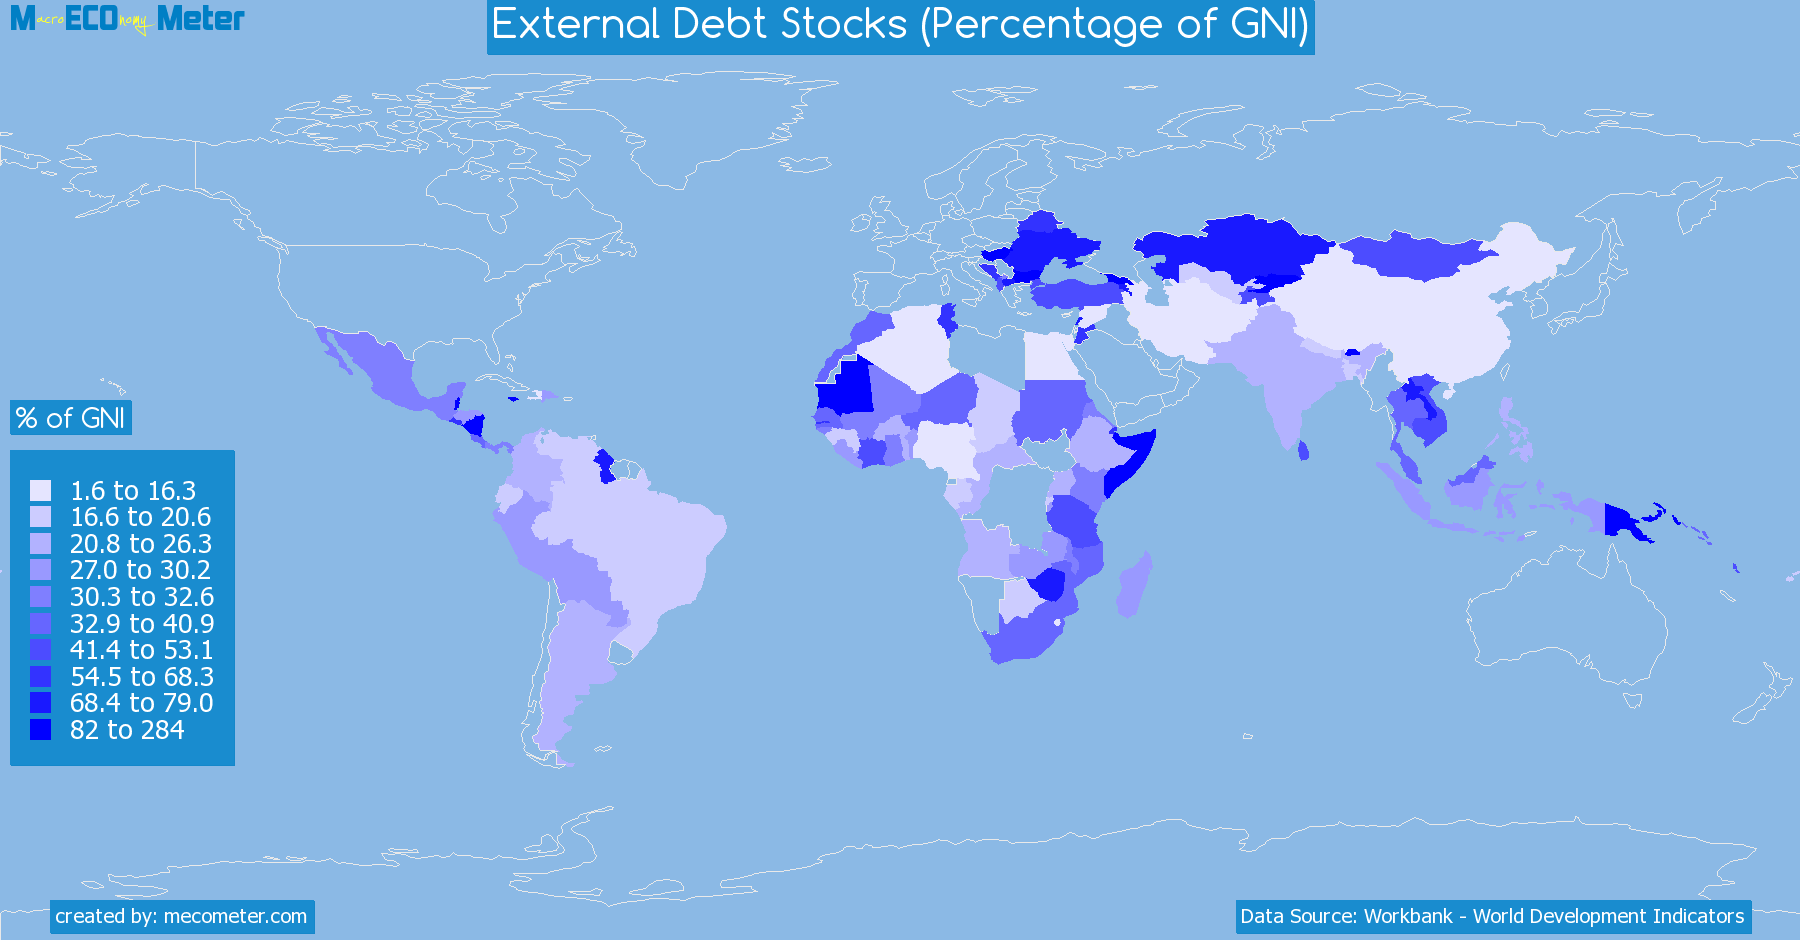 Worldmap of all countries colored to reflect the values of External Debt Stocks (Percentage of GNI)